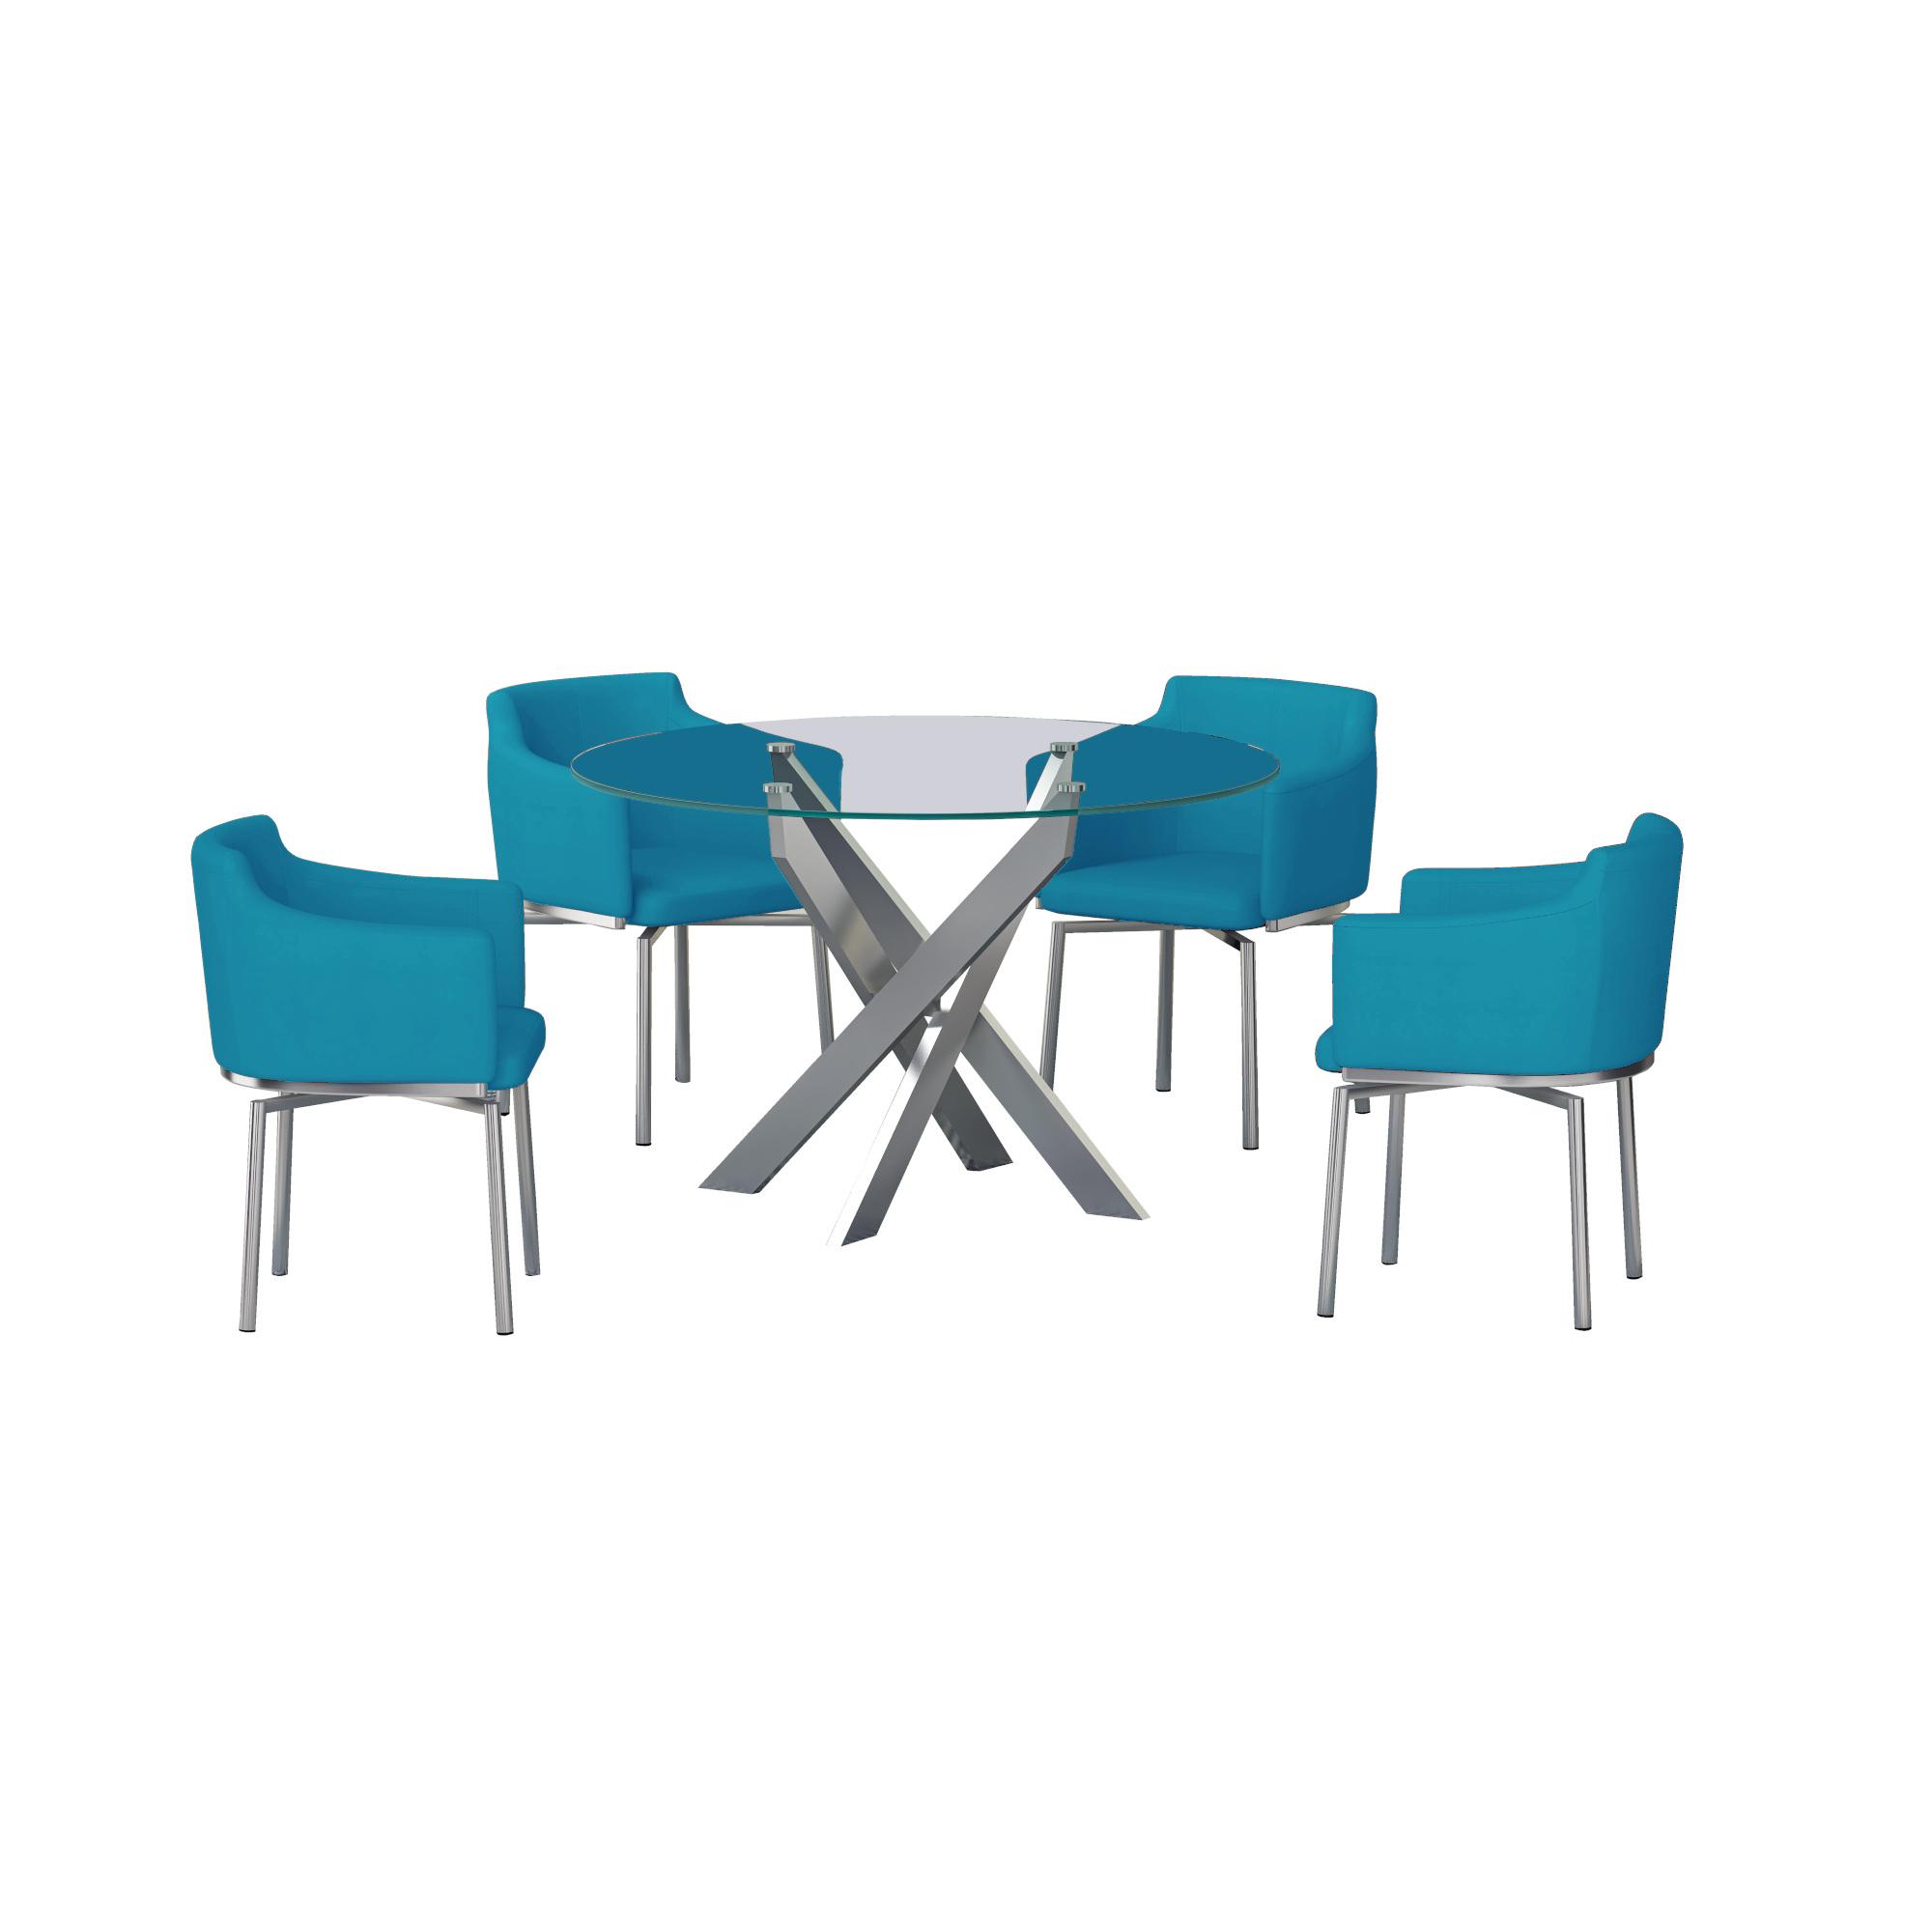 Chintaly Imports Dusty Dining Sets